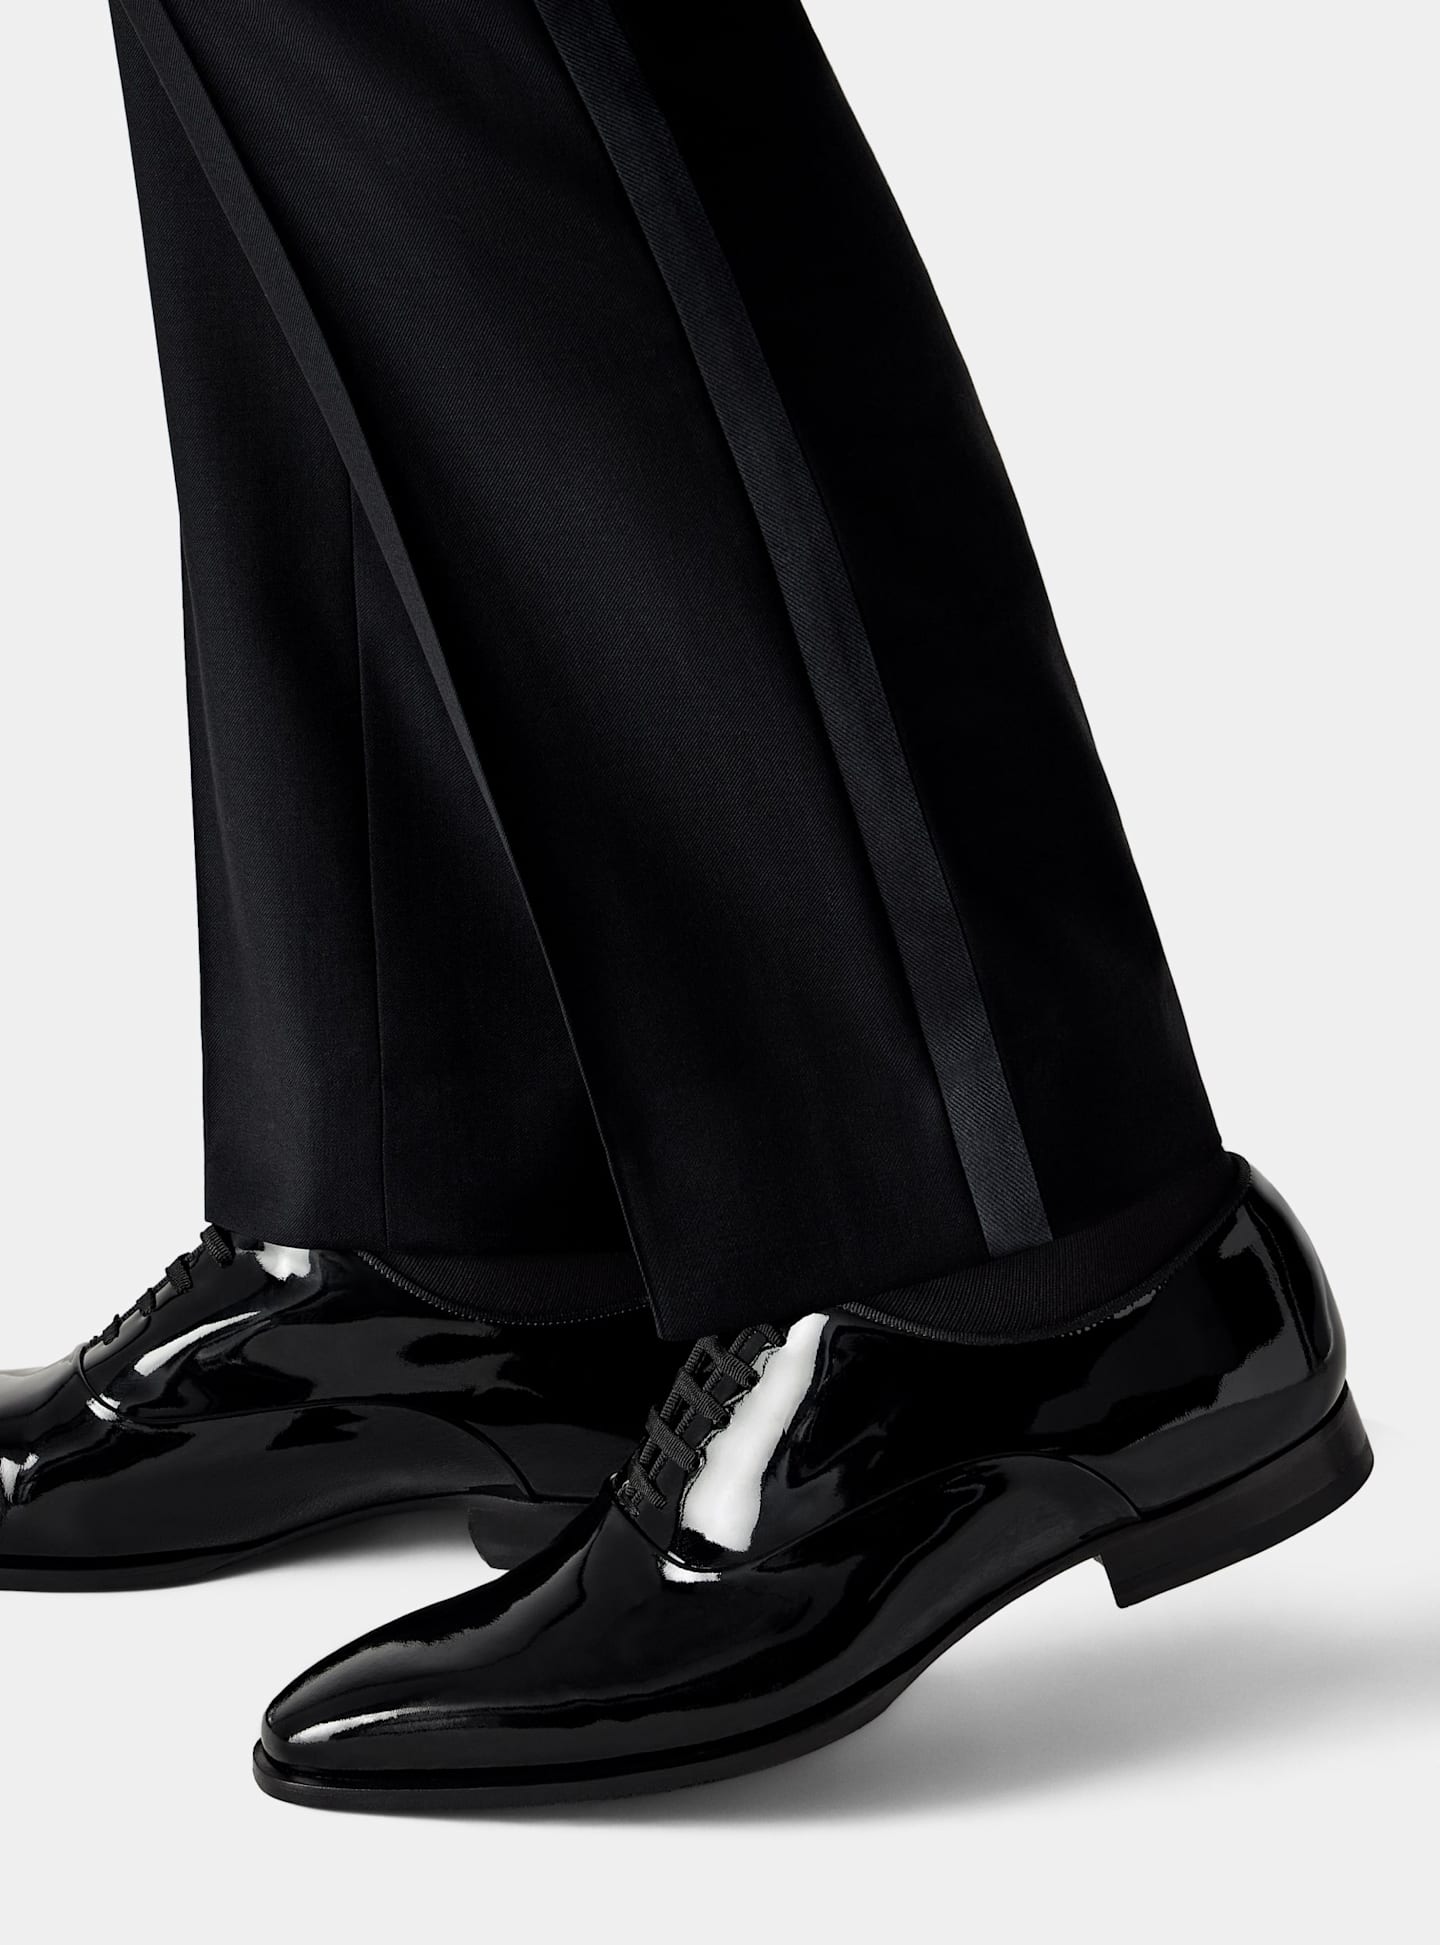 Detail of tuxedo trousers and black patent leather lace-ups.